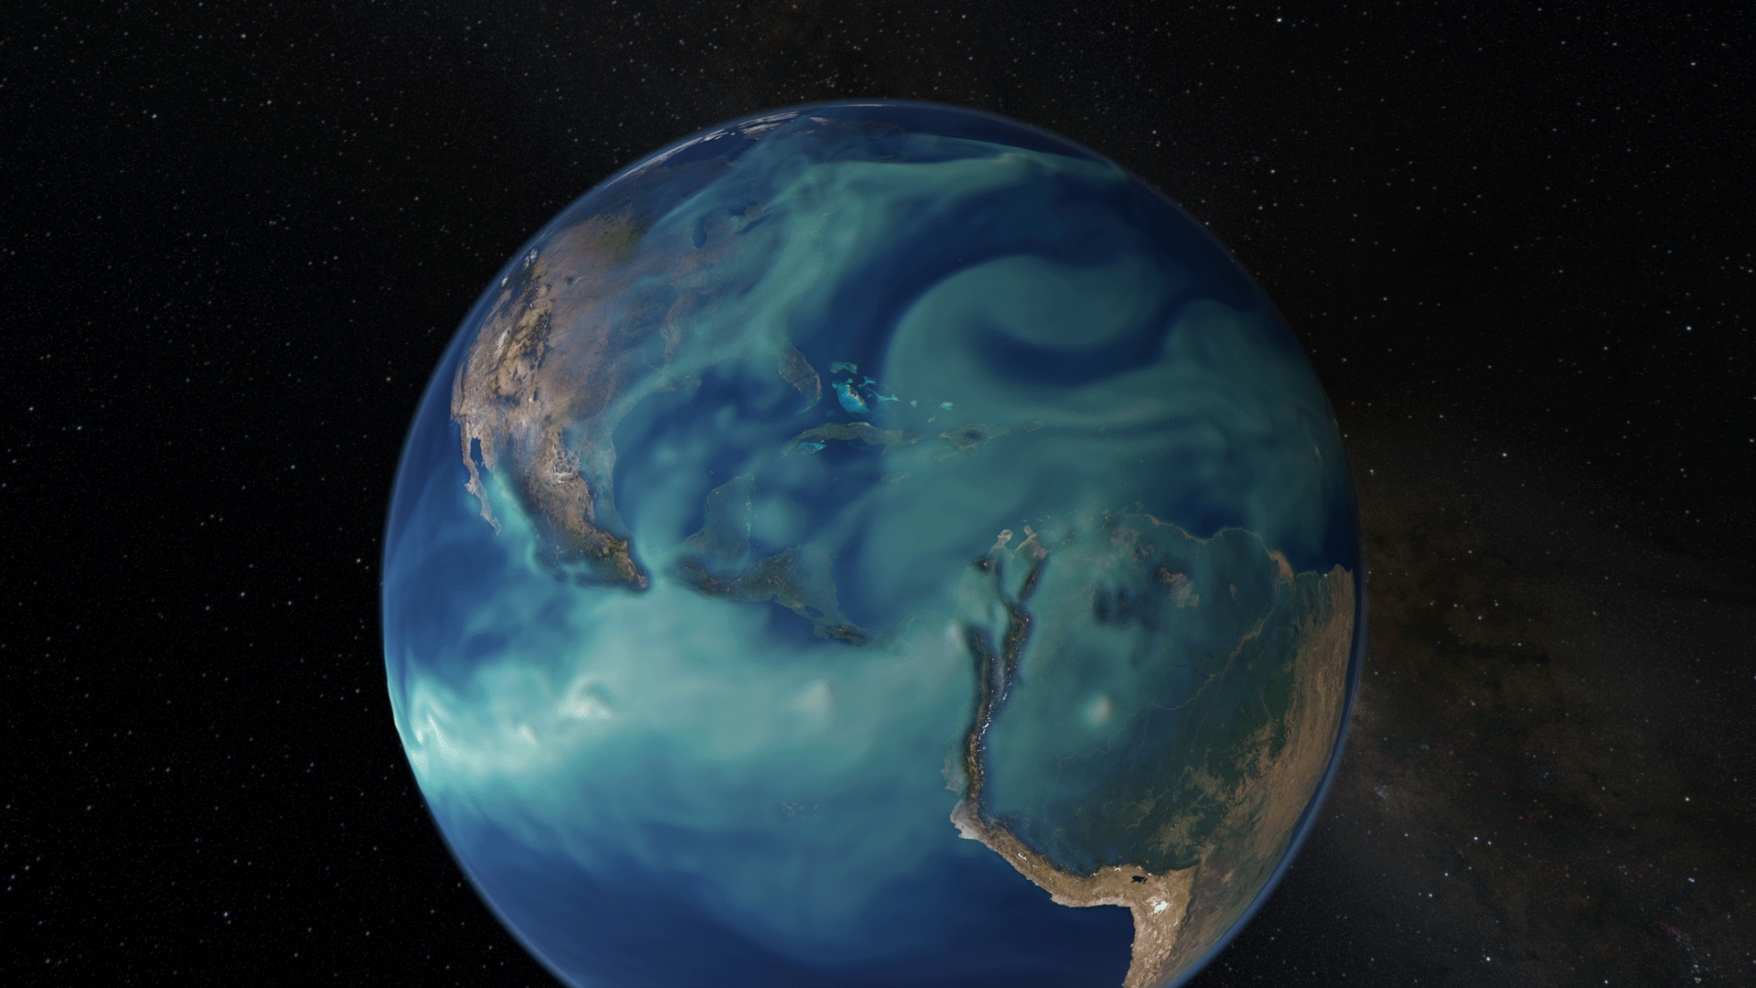 Screenshot from the documentary Atlas of a Changing Earth showing Earth from outer space with North and South America experiencing widespread flooding